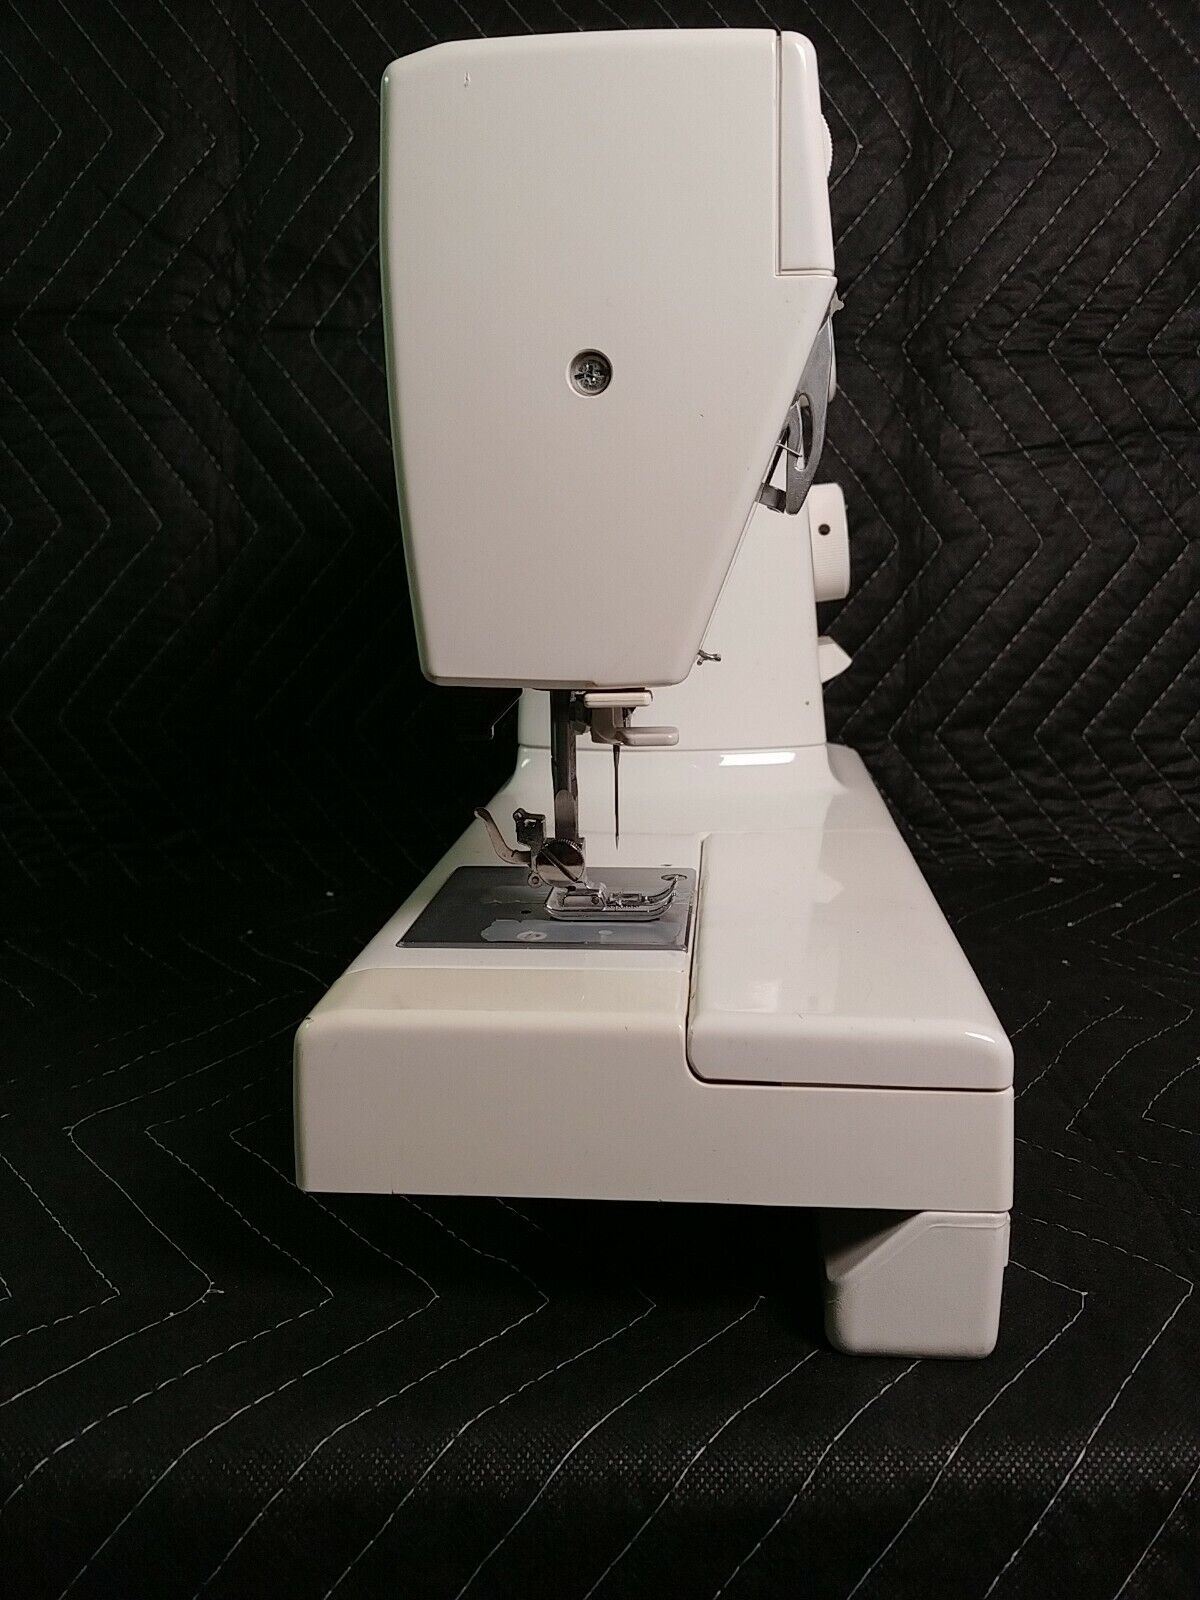 Janome HD1000 Industrial Grade Sewing Machine